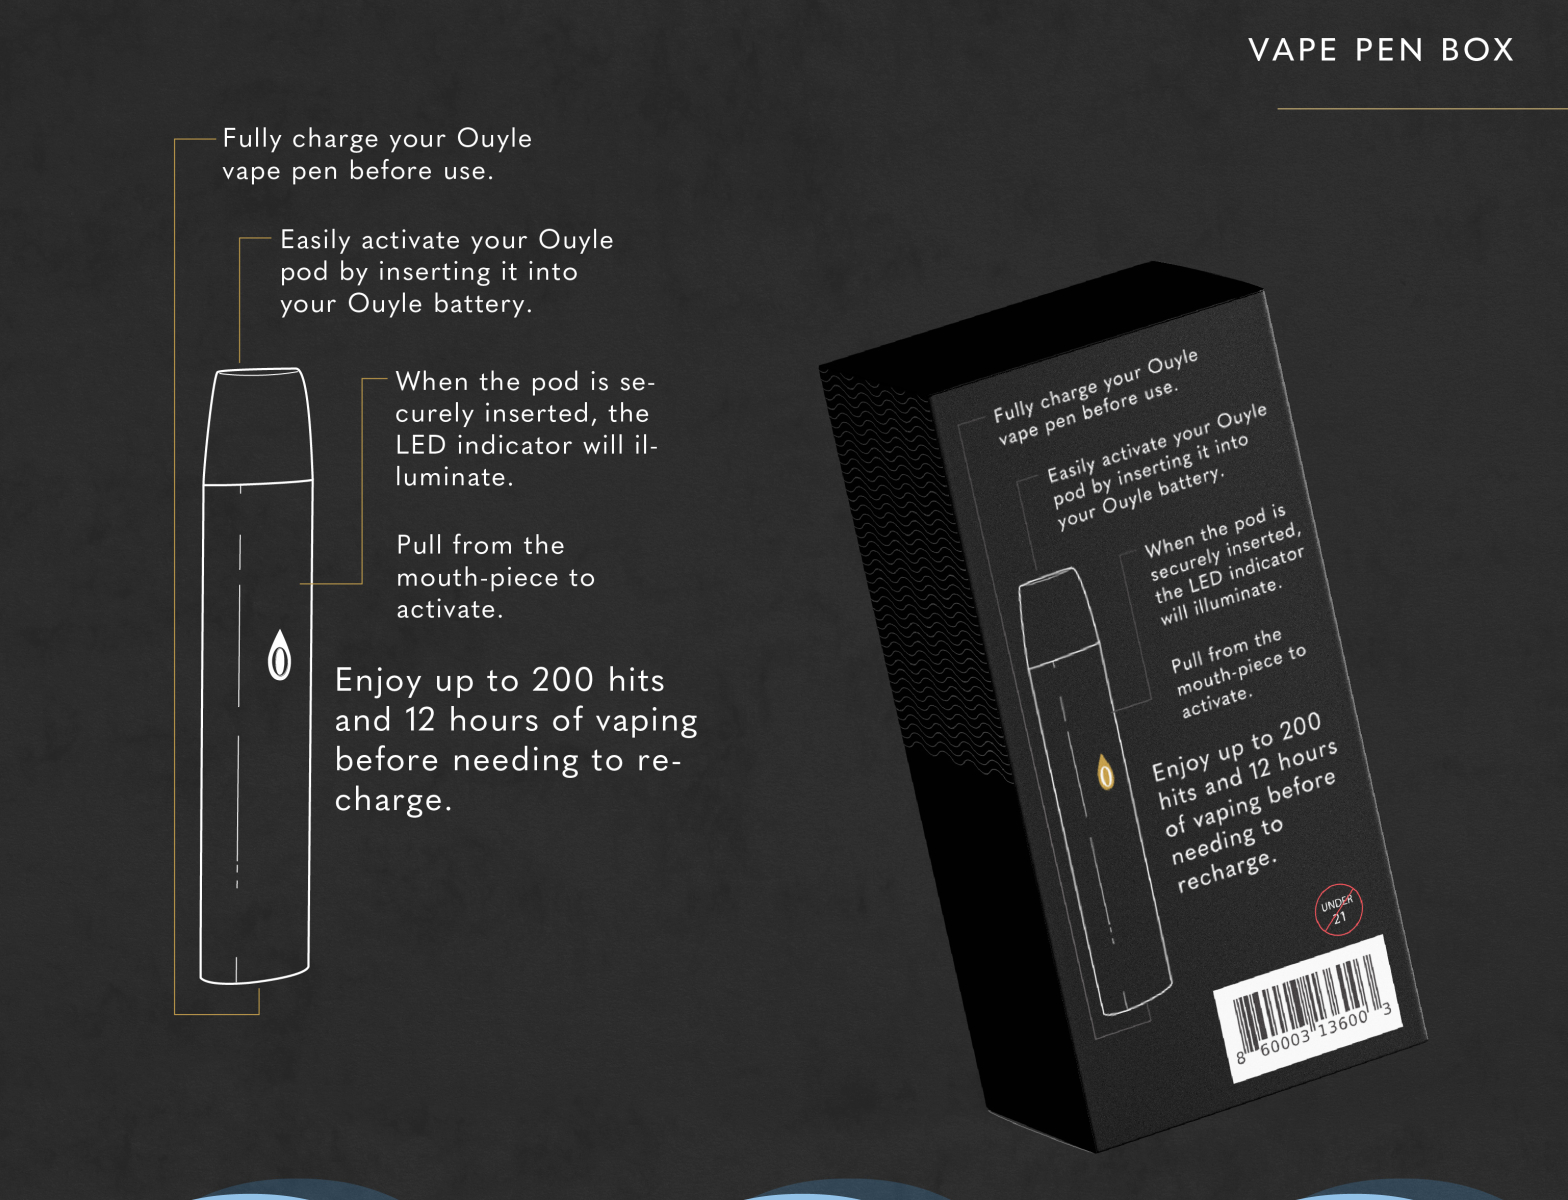 Download Vape Pen Package Design By Meesh Scannapieco On Dribbble